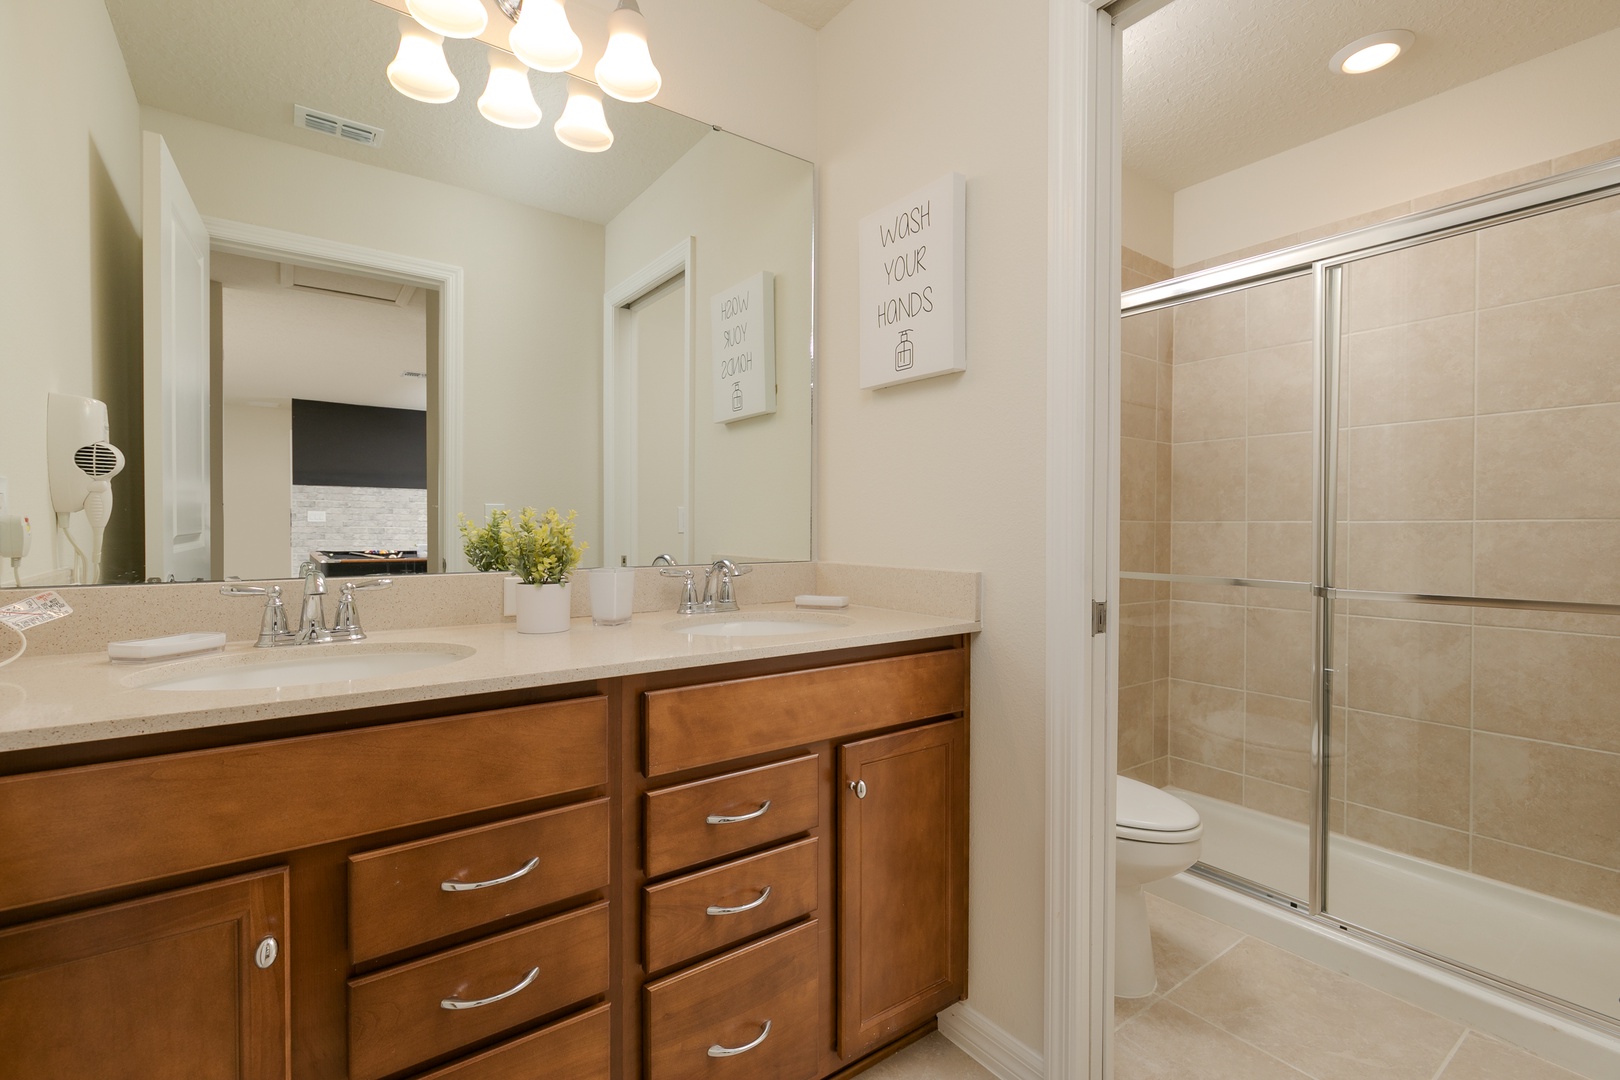 This 2nd floor full bathroom offers a double vanity & glass shower